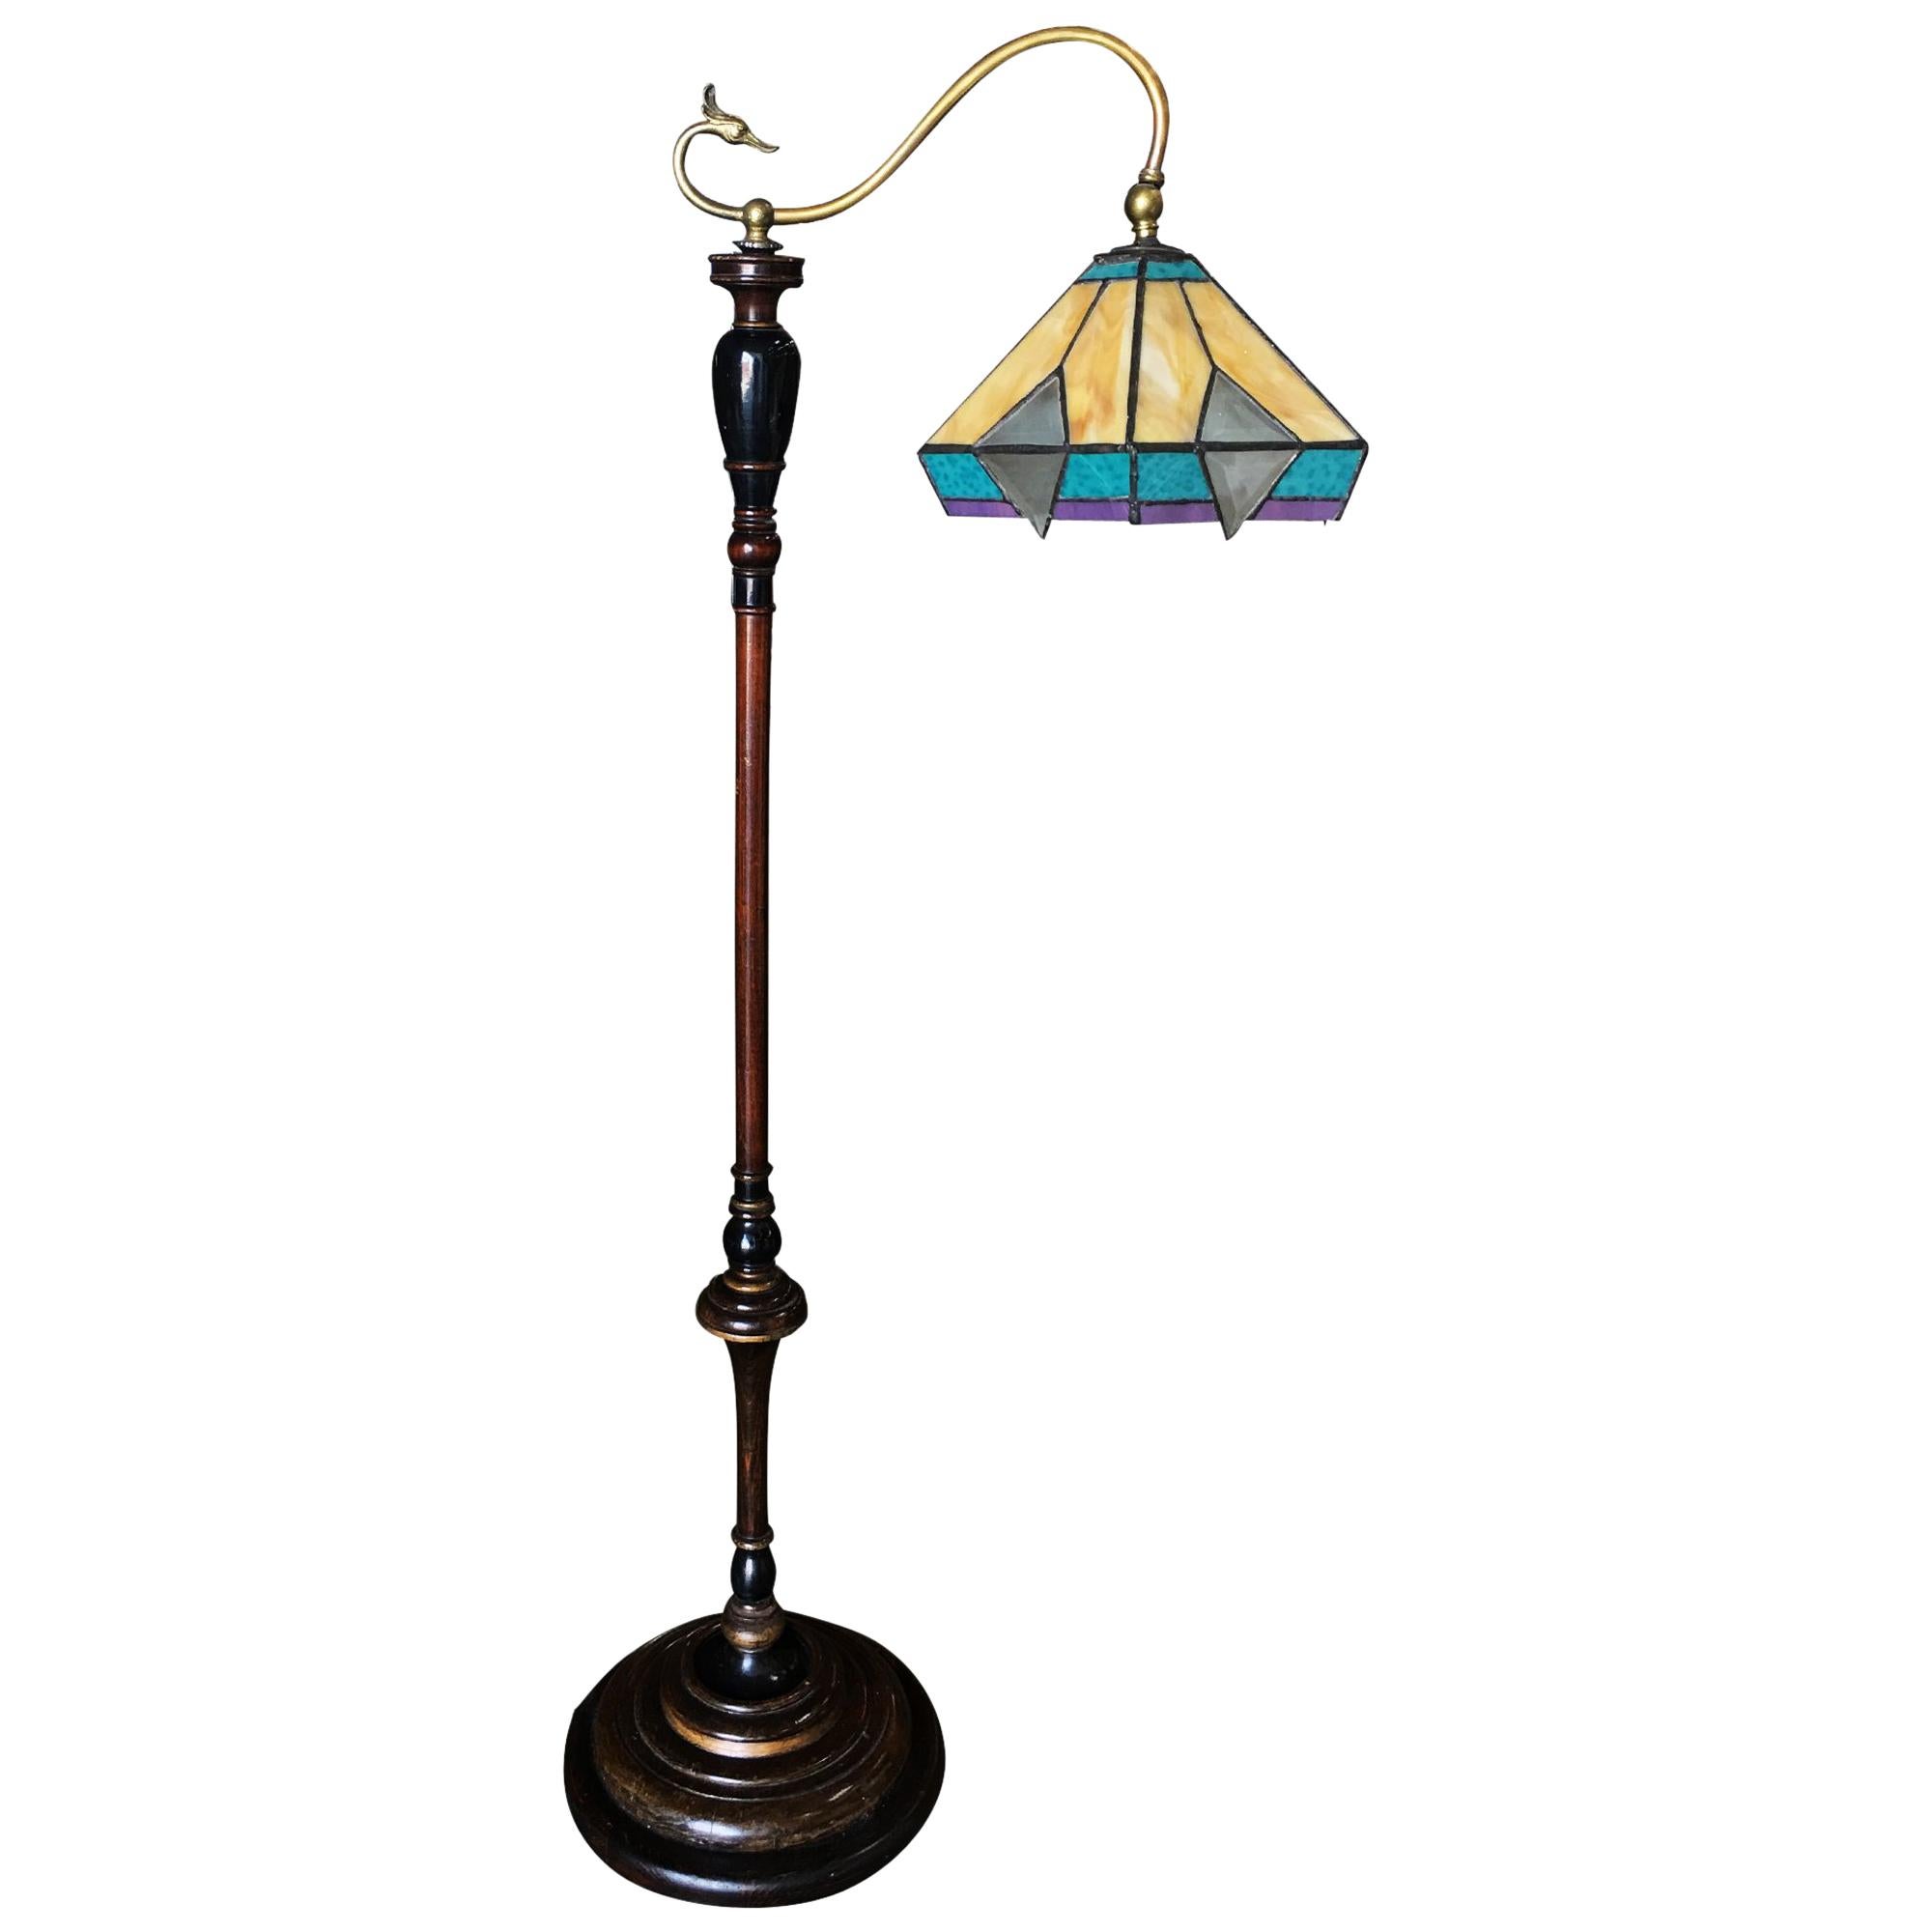 Late Victorian Style Floor Lamp Tiffany Inspired Stain Glass Shade